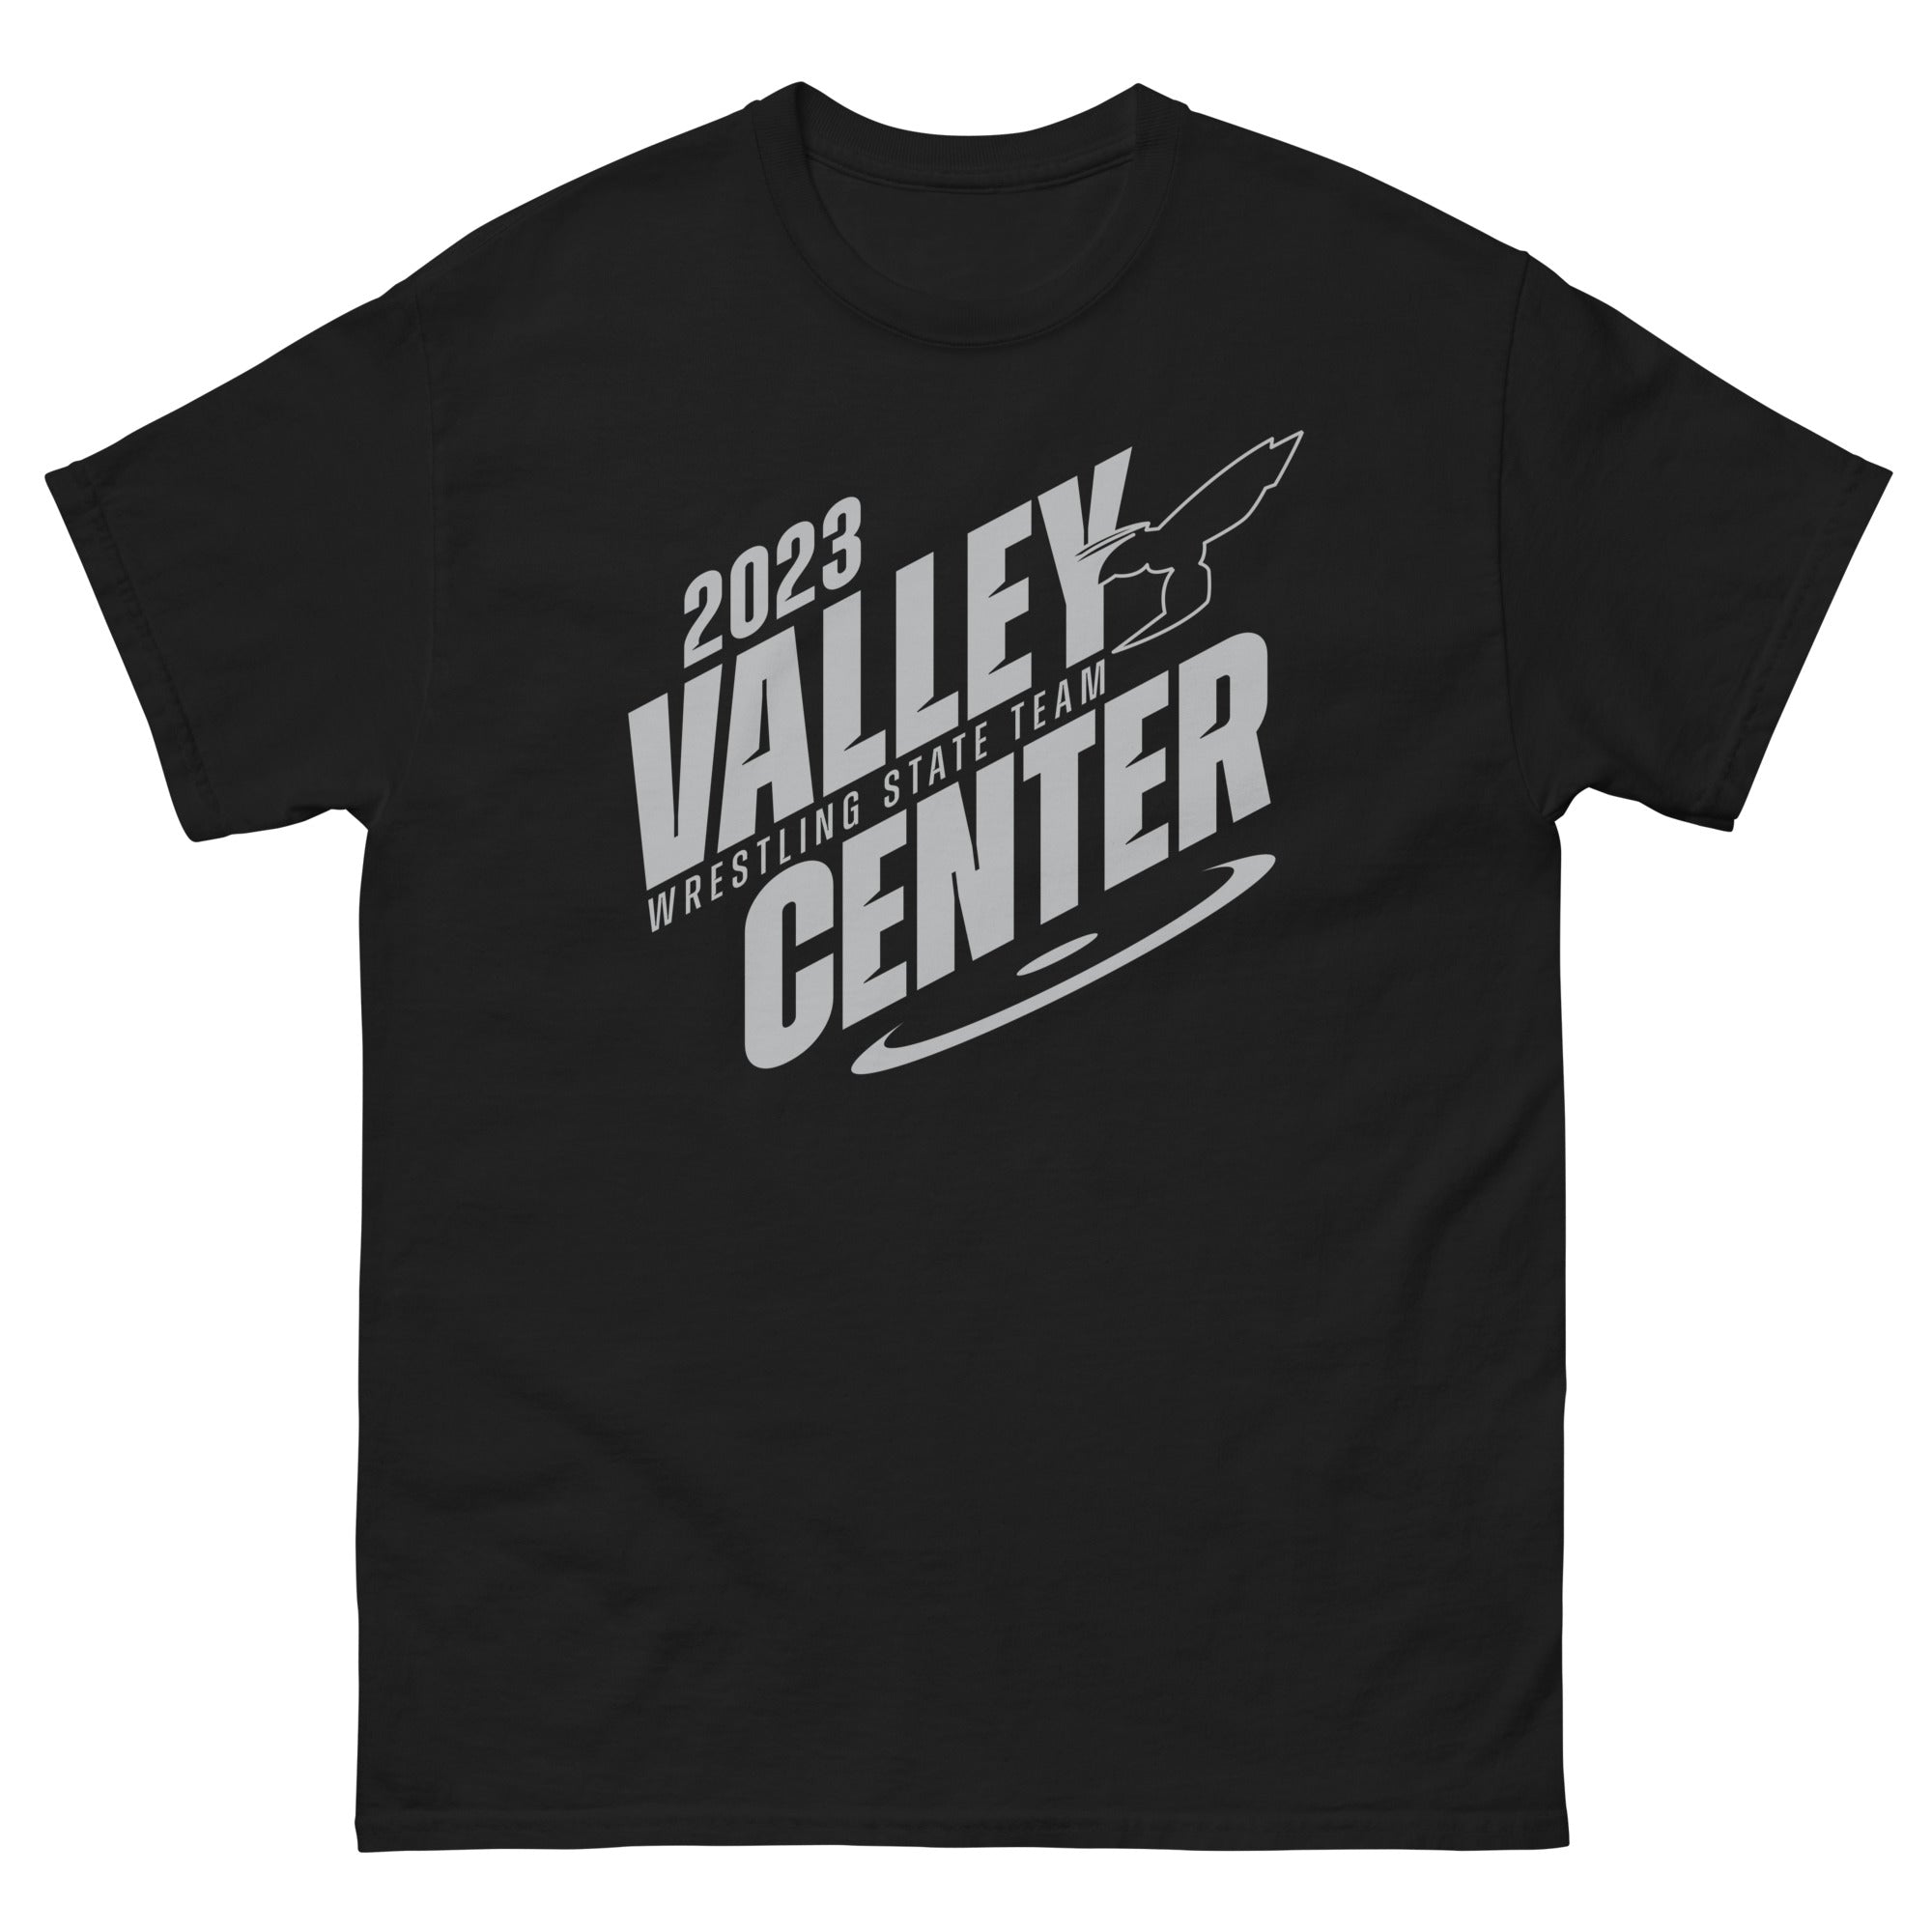 Valley Center Girls State 2023 Men's classic tee